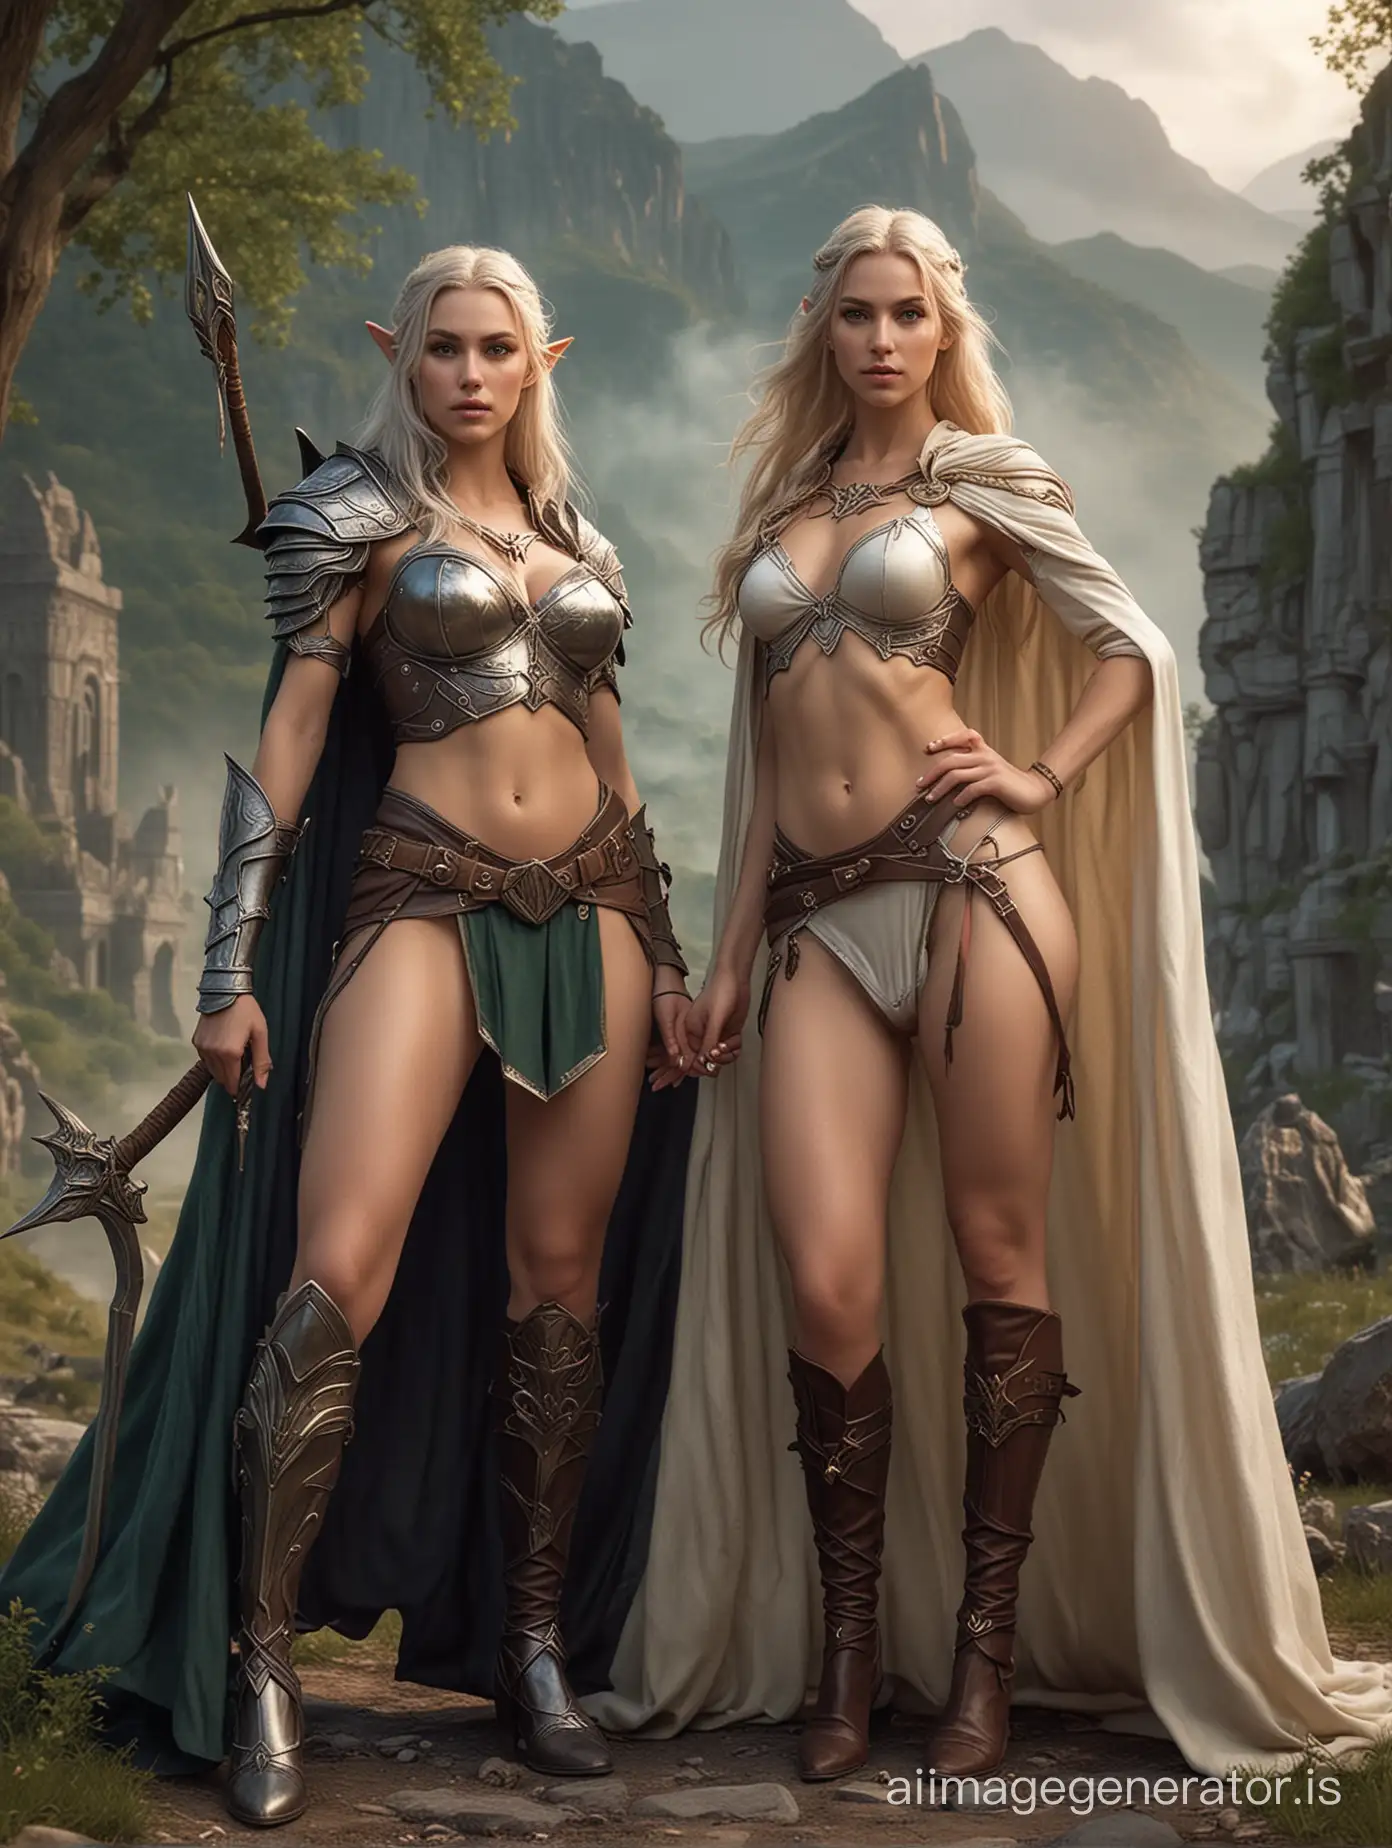 Sultry-Elven-Warrior-and-Mage-in-Fantasy-Battlefield